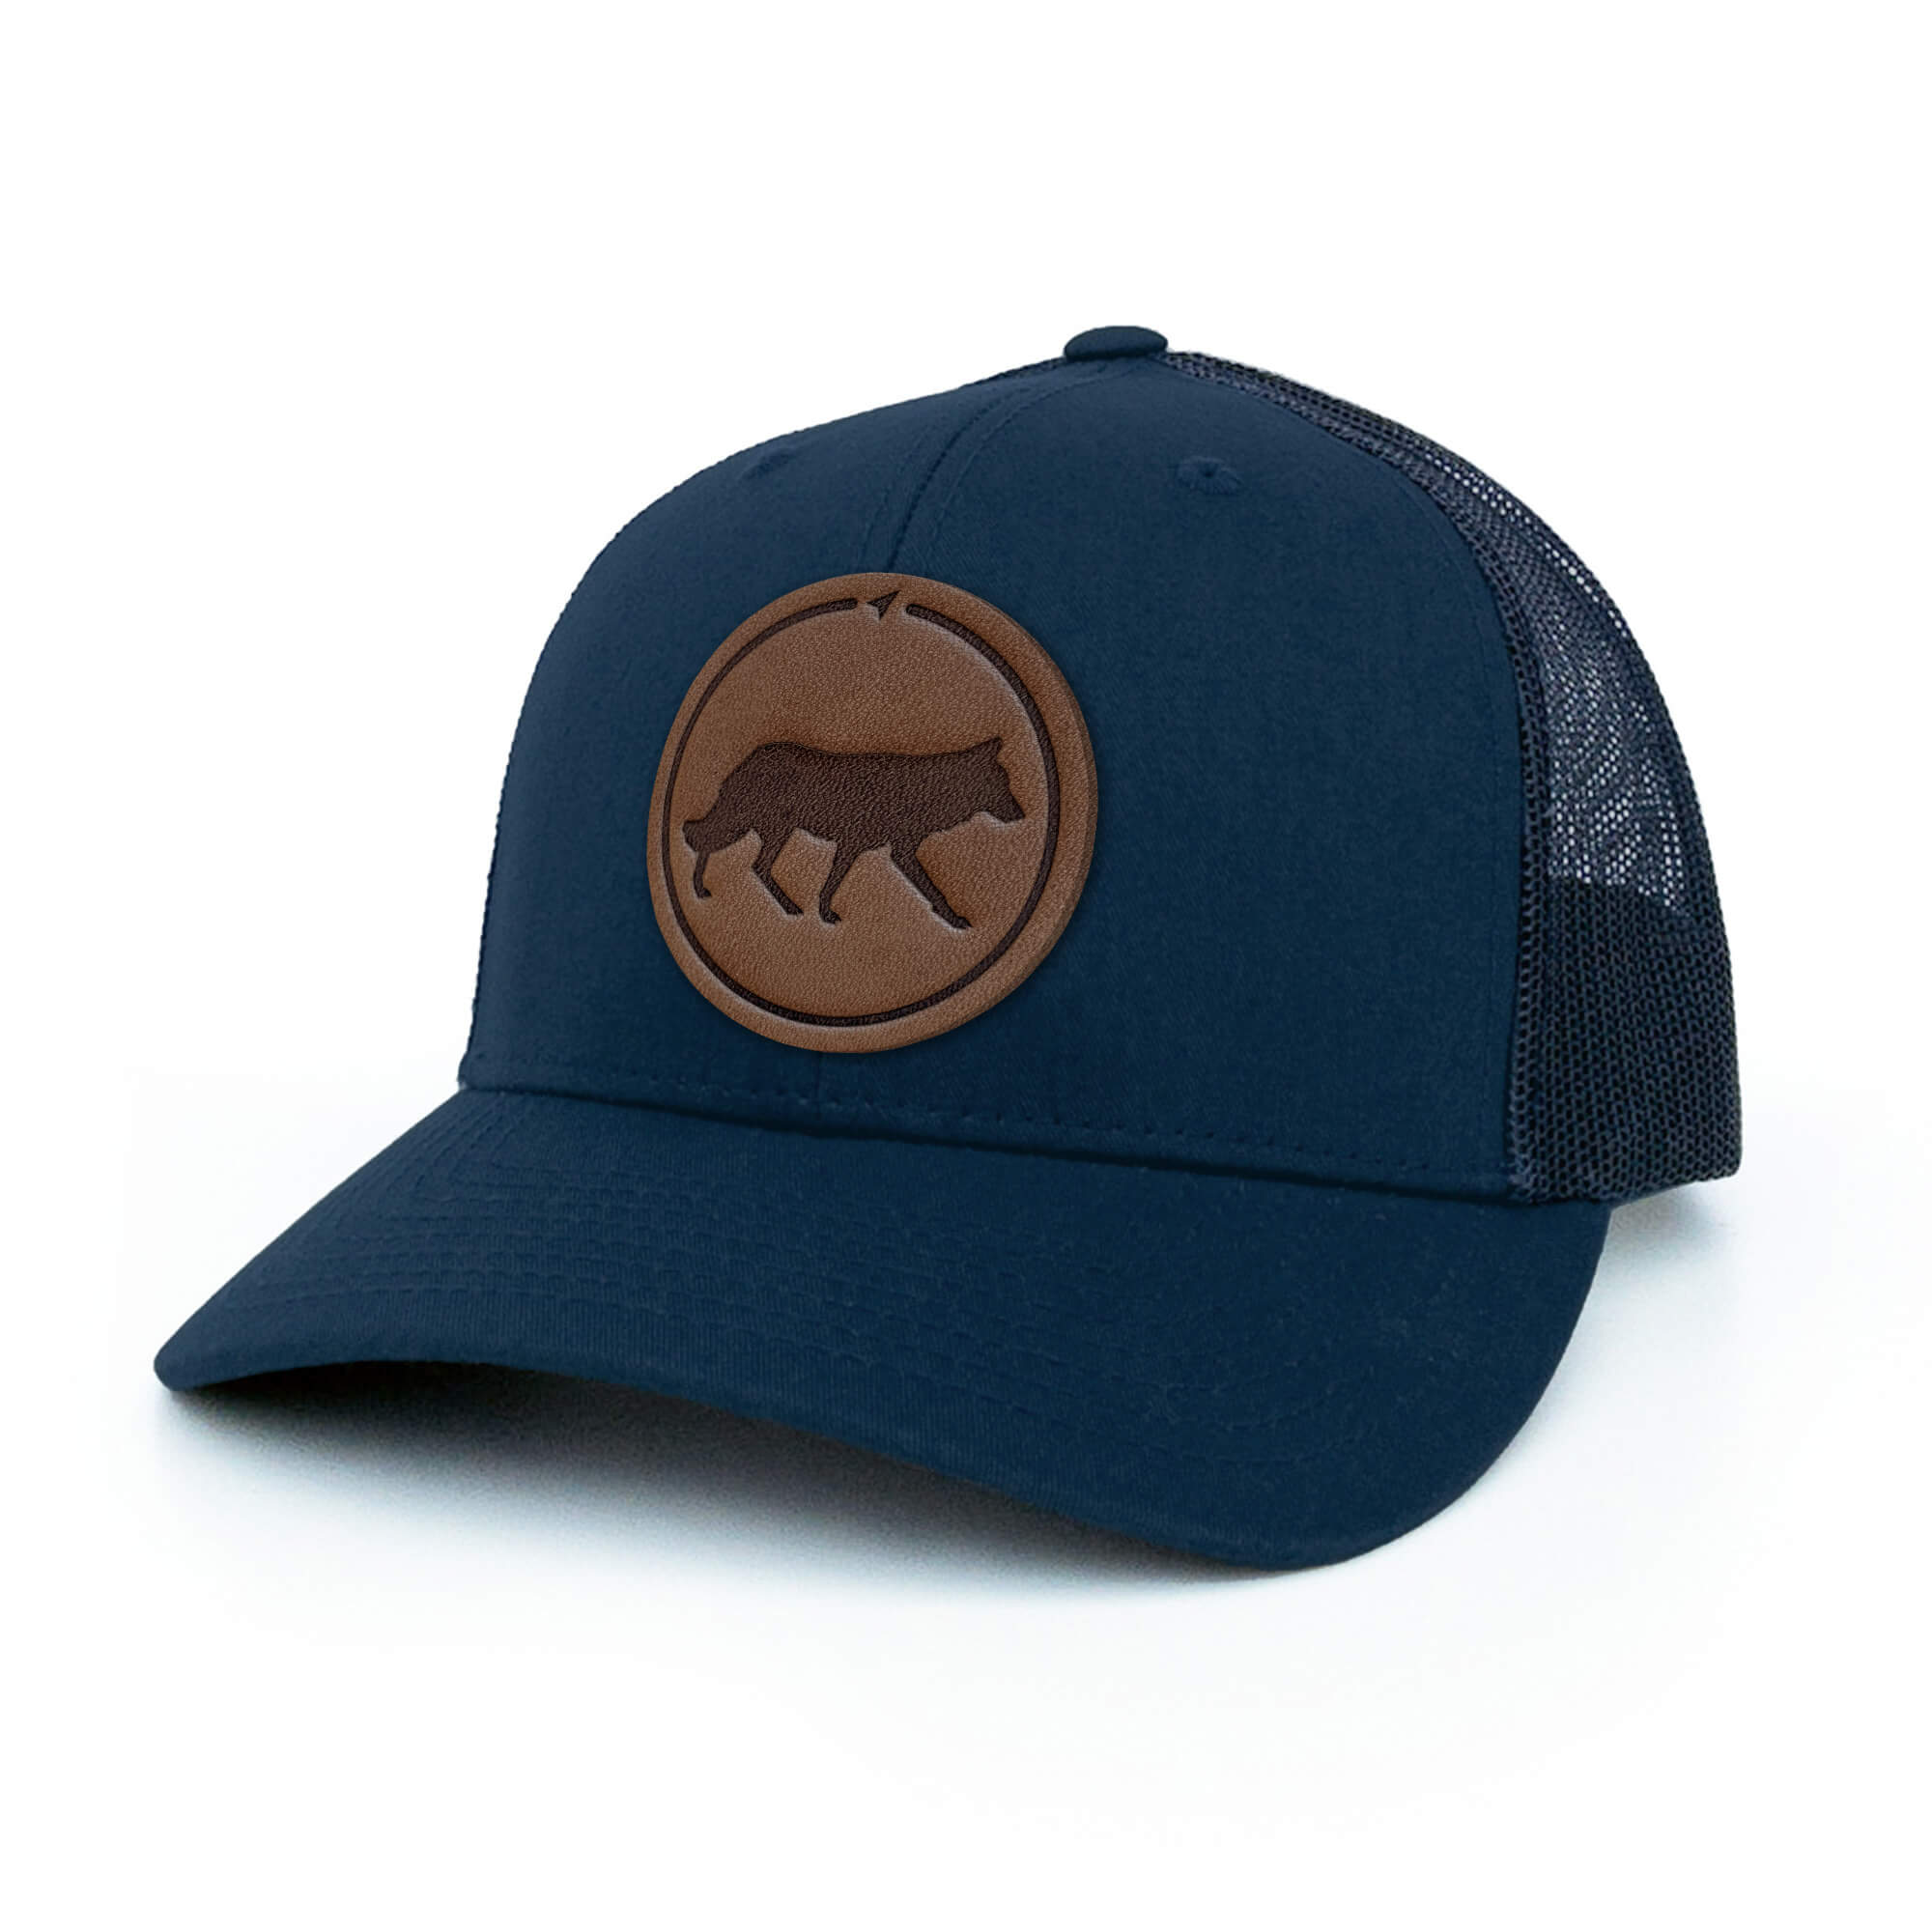 Navy trucker hat with full-grain leather patch of Wolf | BLACK-004-007, CHARC-004-007, NAVY-004-007, HGREY-004-007, MOSS-004-007, BROWN-004-007